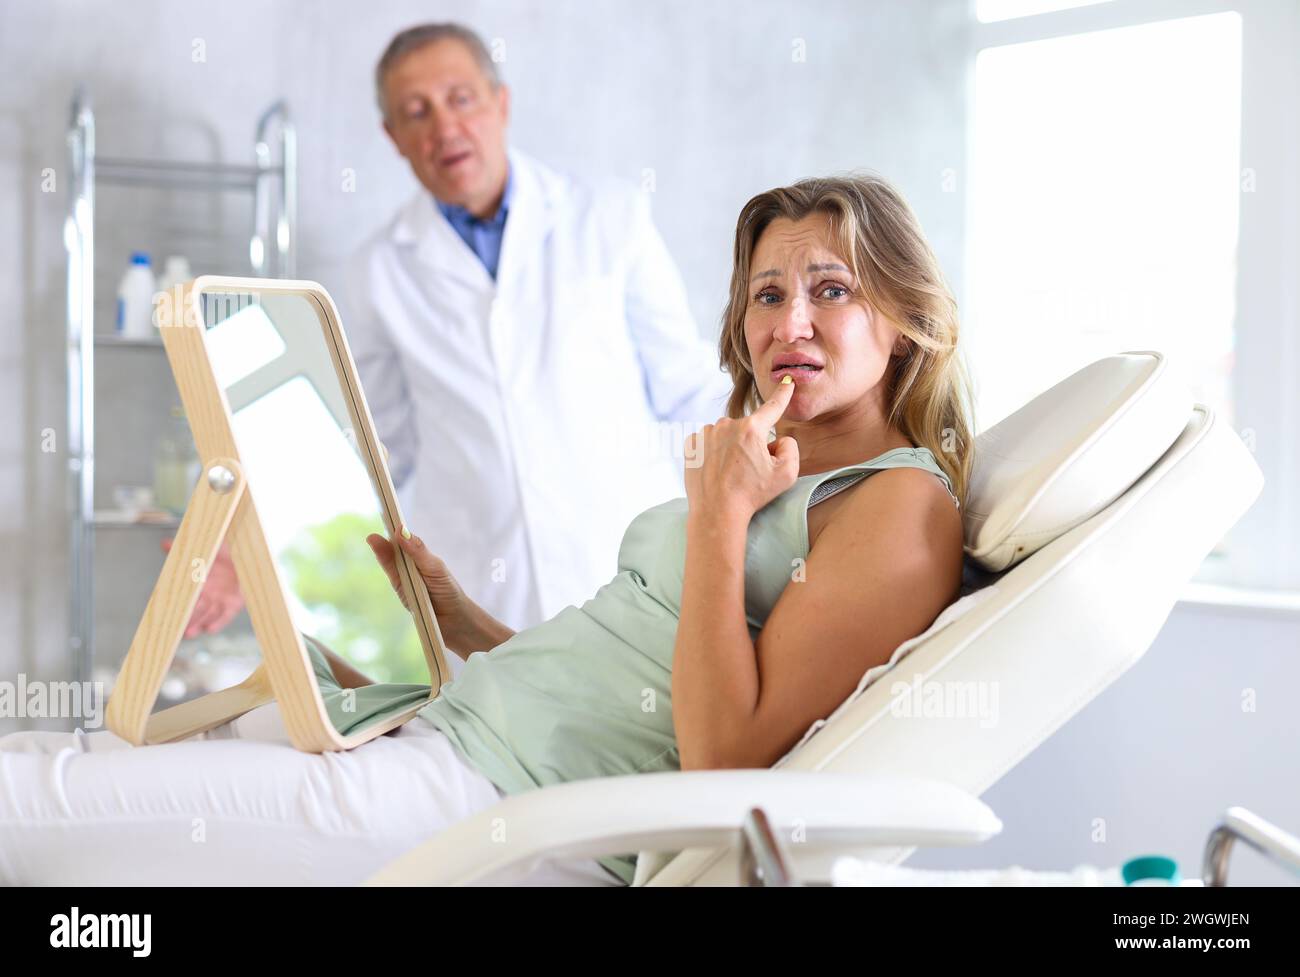 Disappointed woman touching lips after cosmetic treatments in medical office Stock Photo